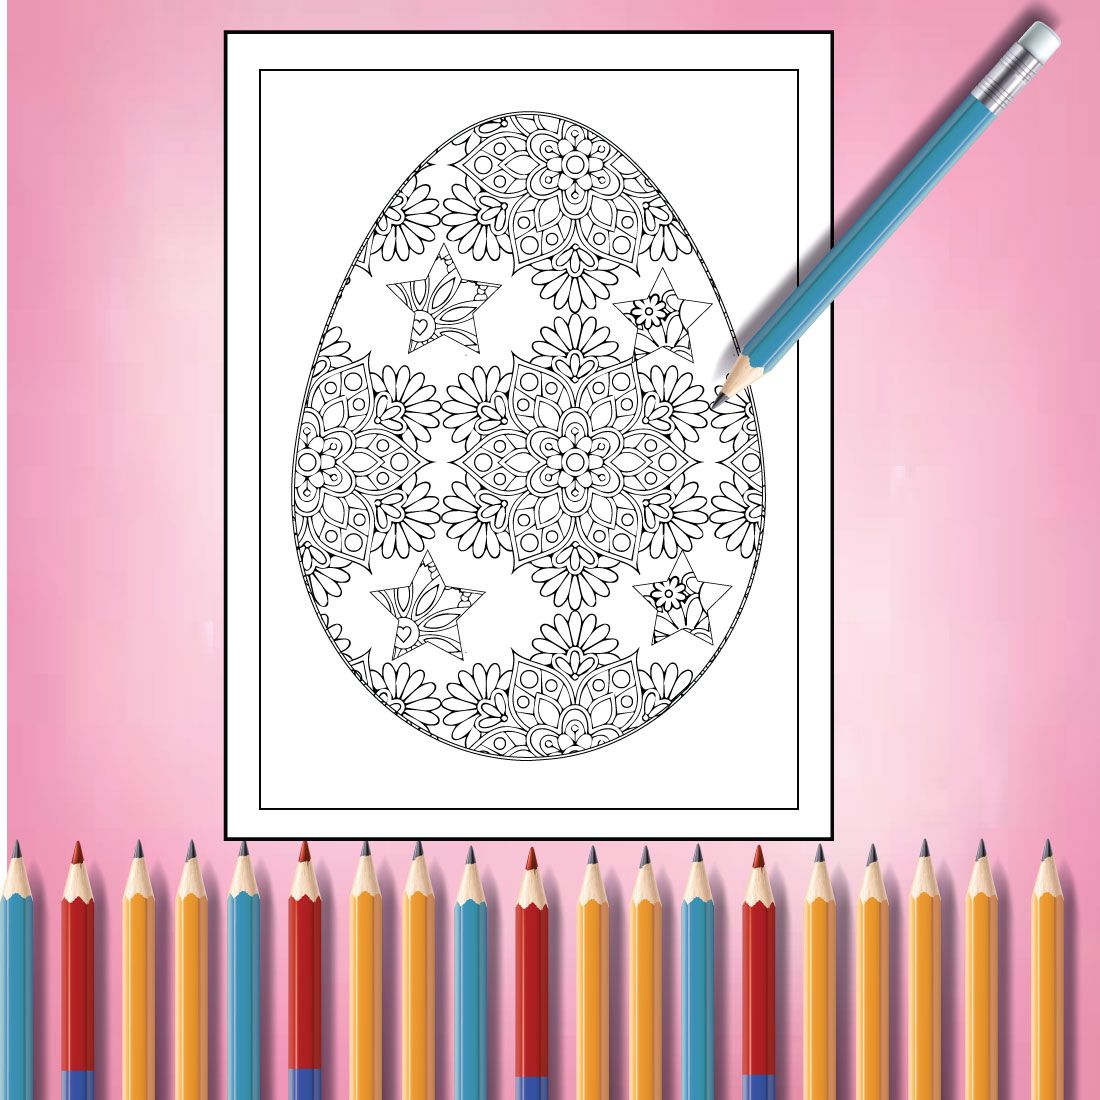 Coloring page with pencils next to it.